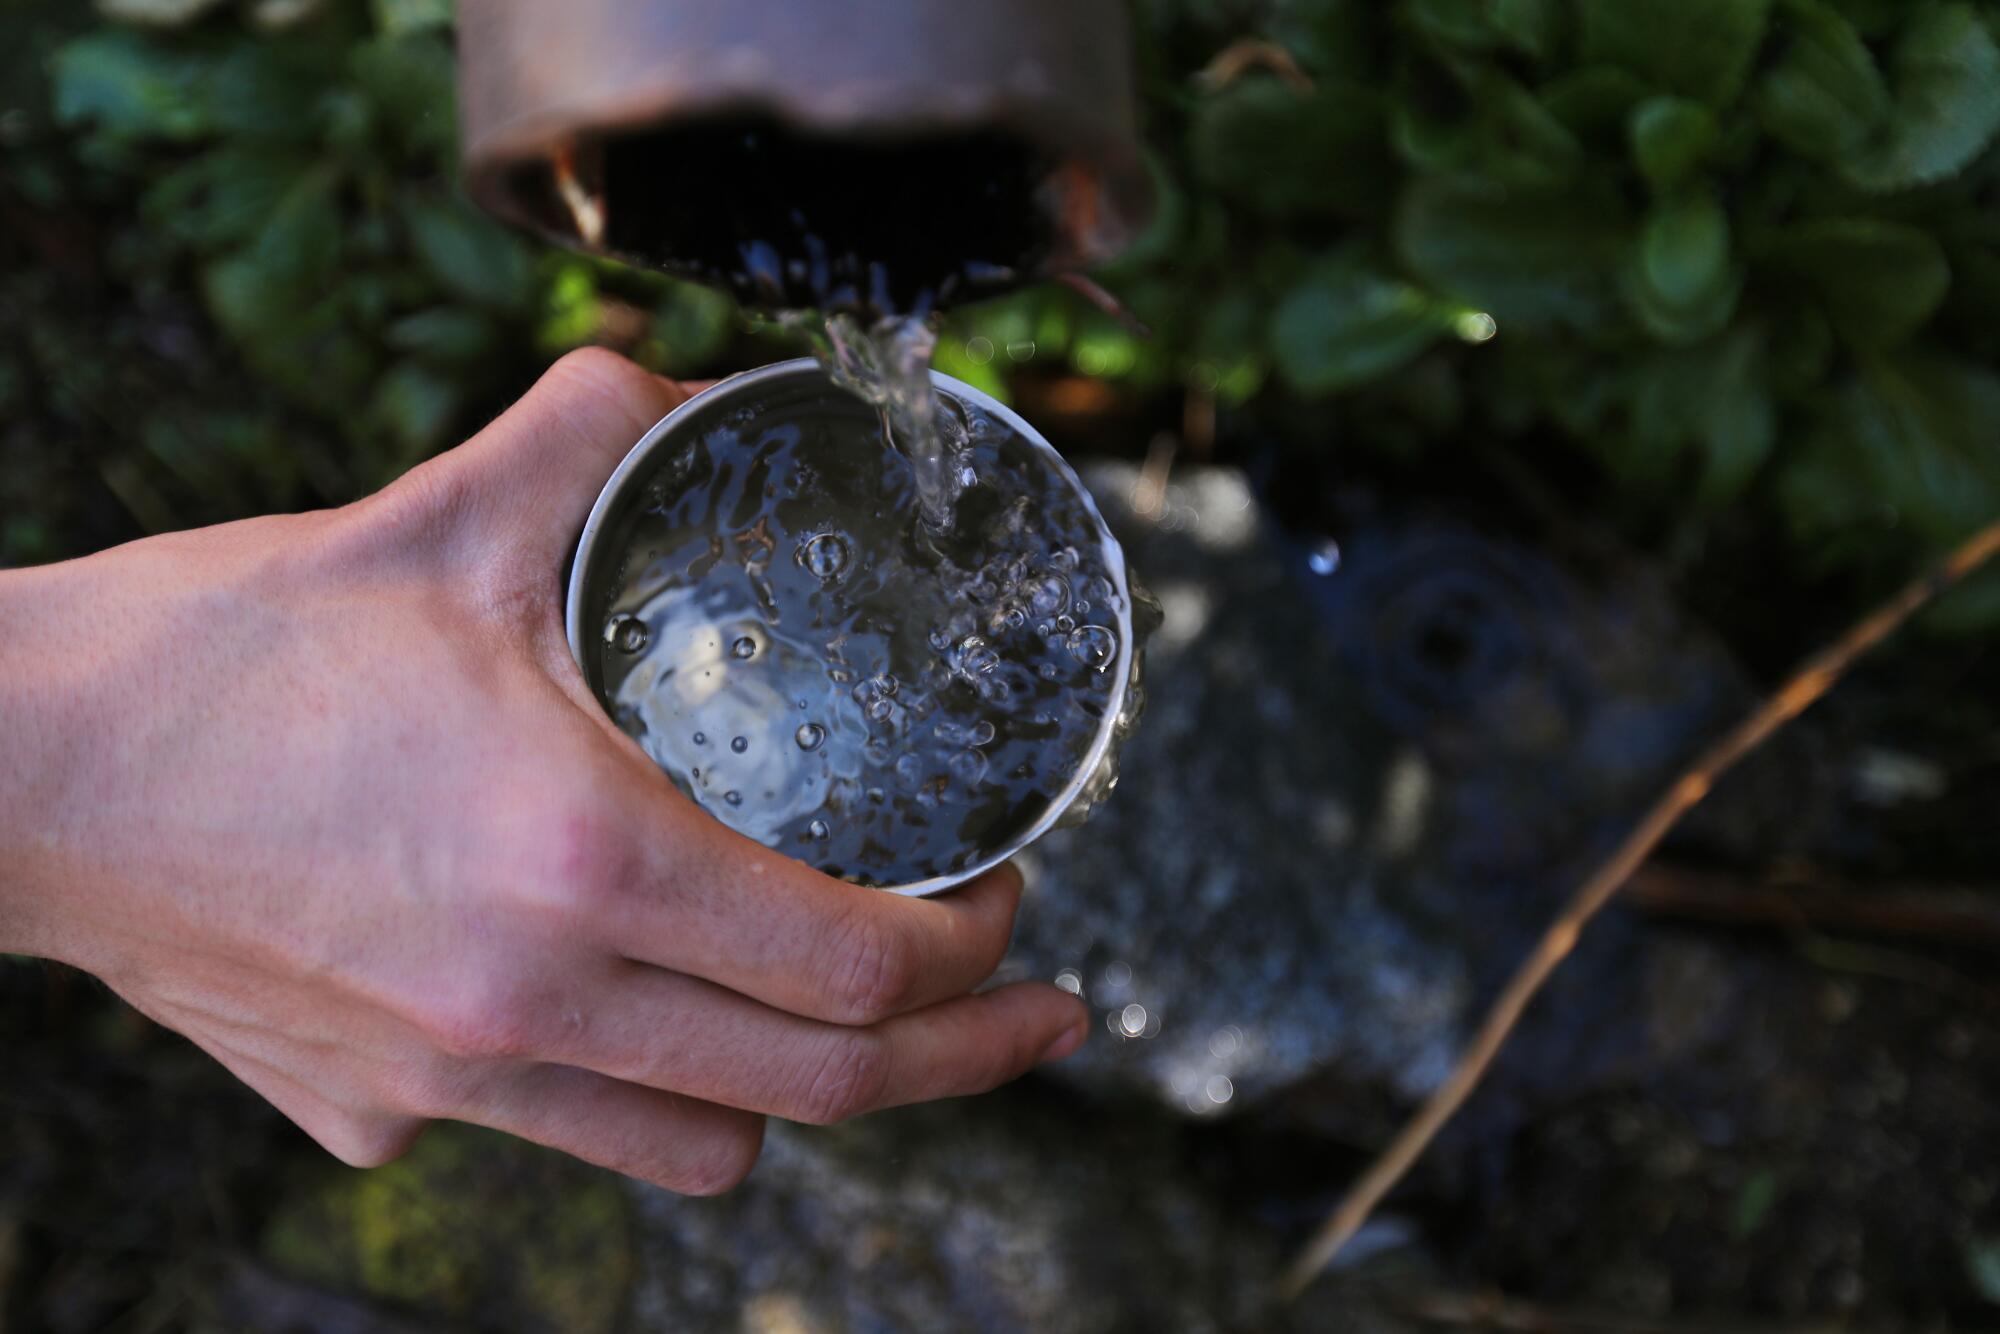 Water flows from a pipe into a metal cup held a hand.